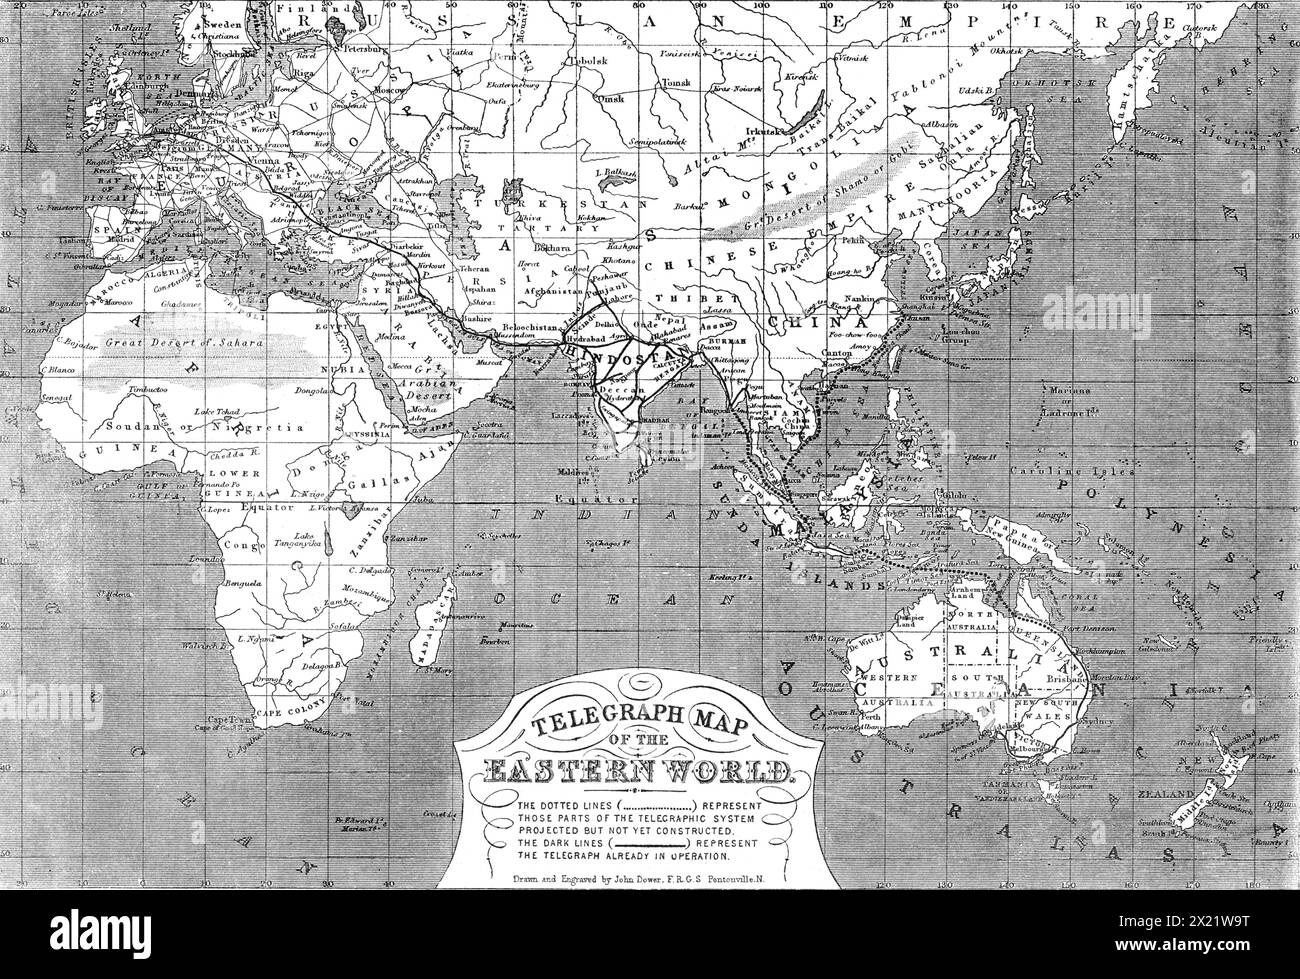 Telegraph map of the Eastern World, 1865. Map showing '...the progress of telegraphic communication from England in the directions of India, China, and the British colonies...It is owing to the immense growth of English commerce and colonisation in those distant regions, as well as to the political and military exigencies of our Indian empire, since the government of the East India Company was superseded by the direct rule of Queen Victoria after the suppression of the revolt of 1857, that the necessity for a speedy transmission of messages between London and the remotest of the British provin Stock Photo